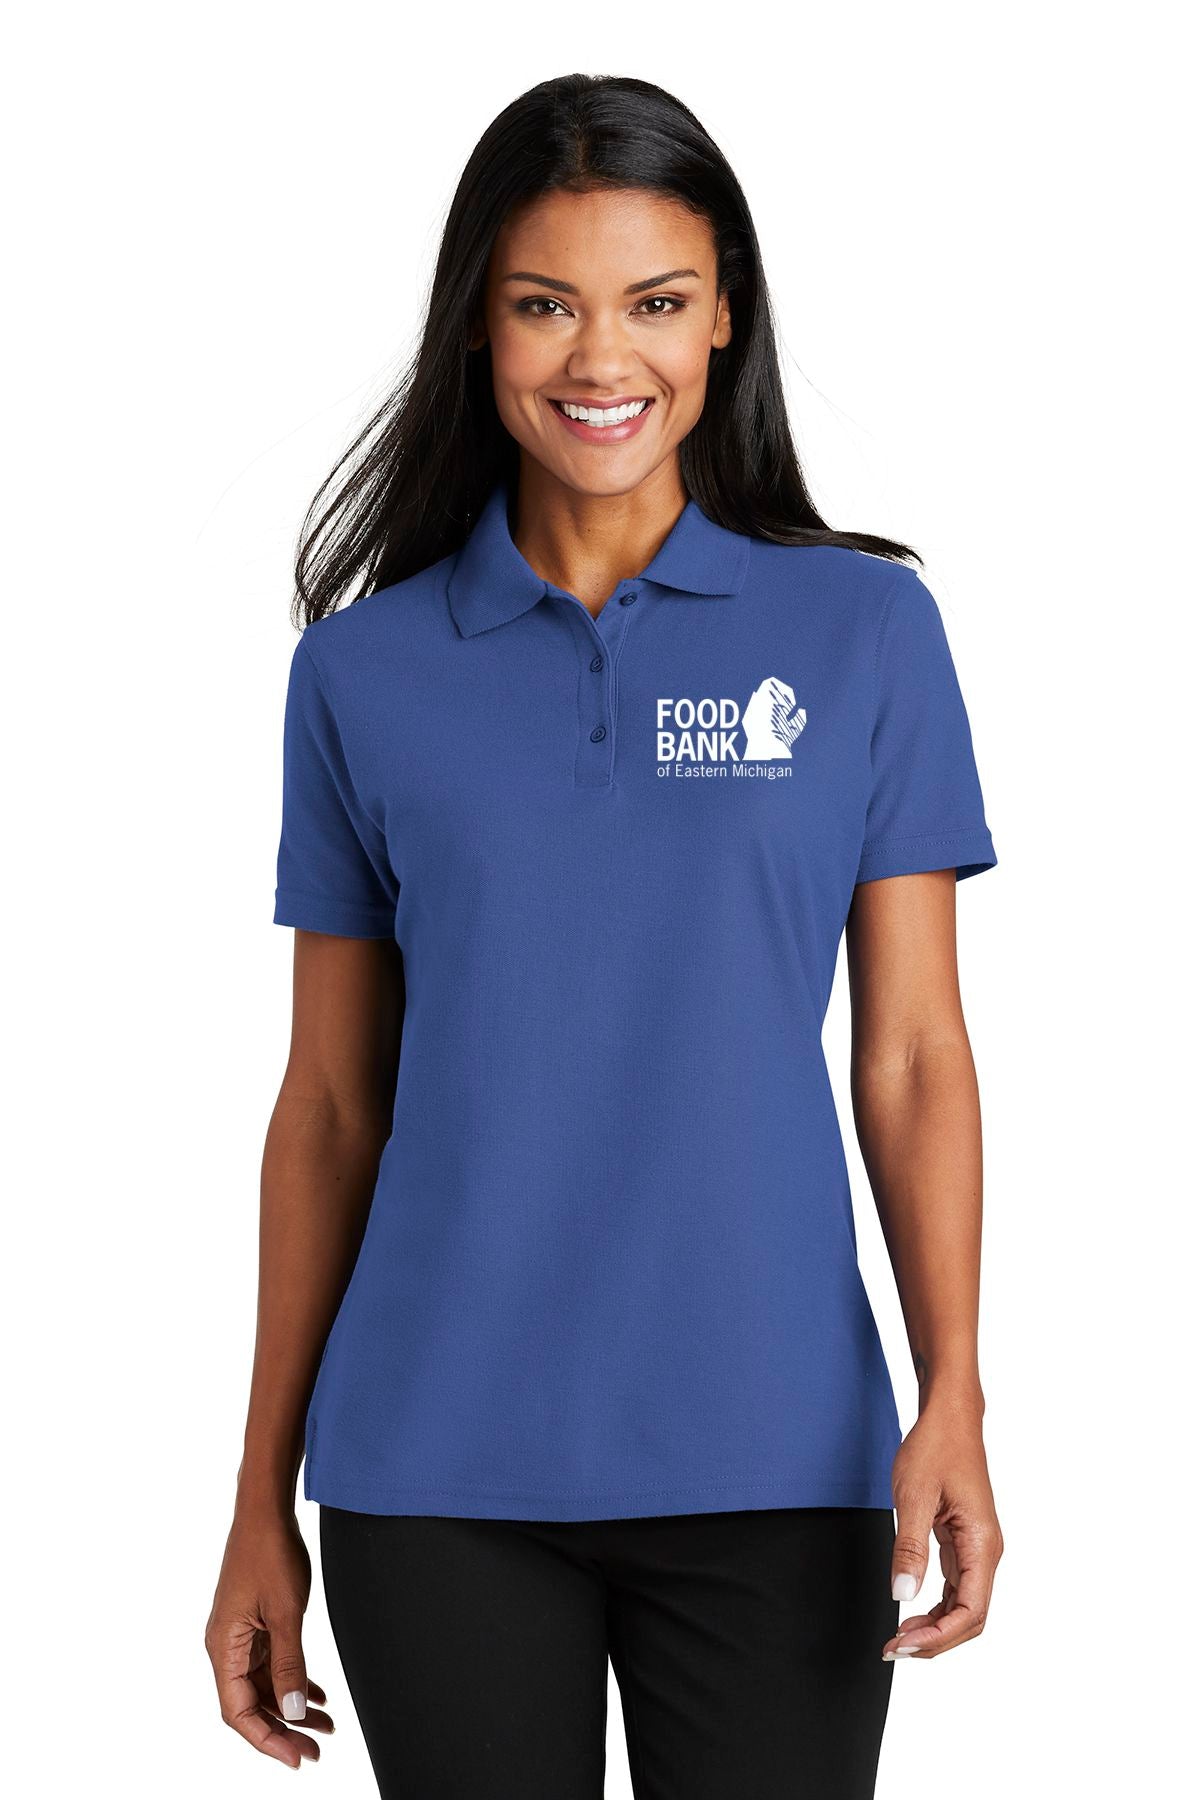 Food Bank of Eastern Michigan Ladies Stain-Release Polo